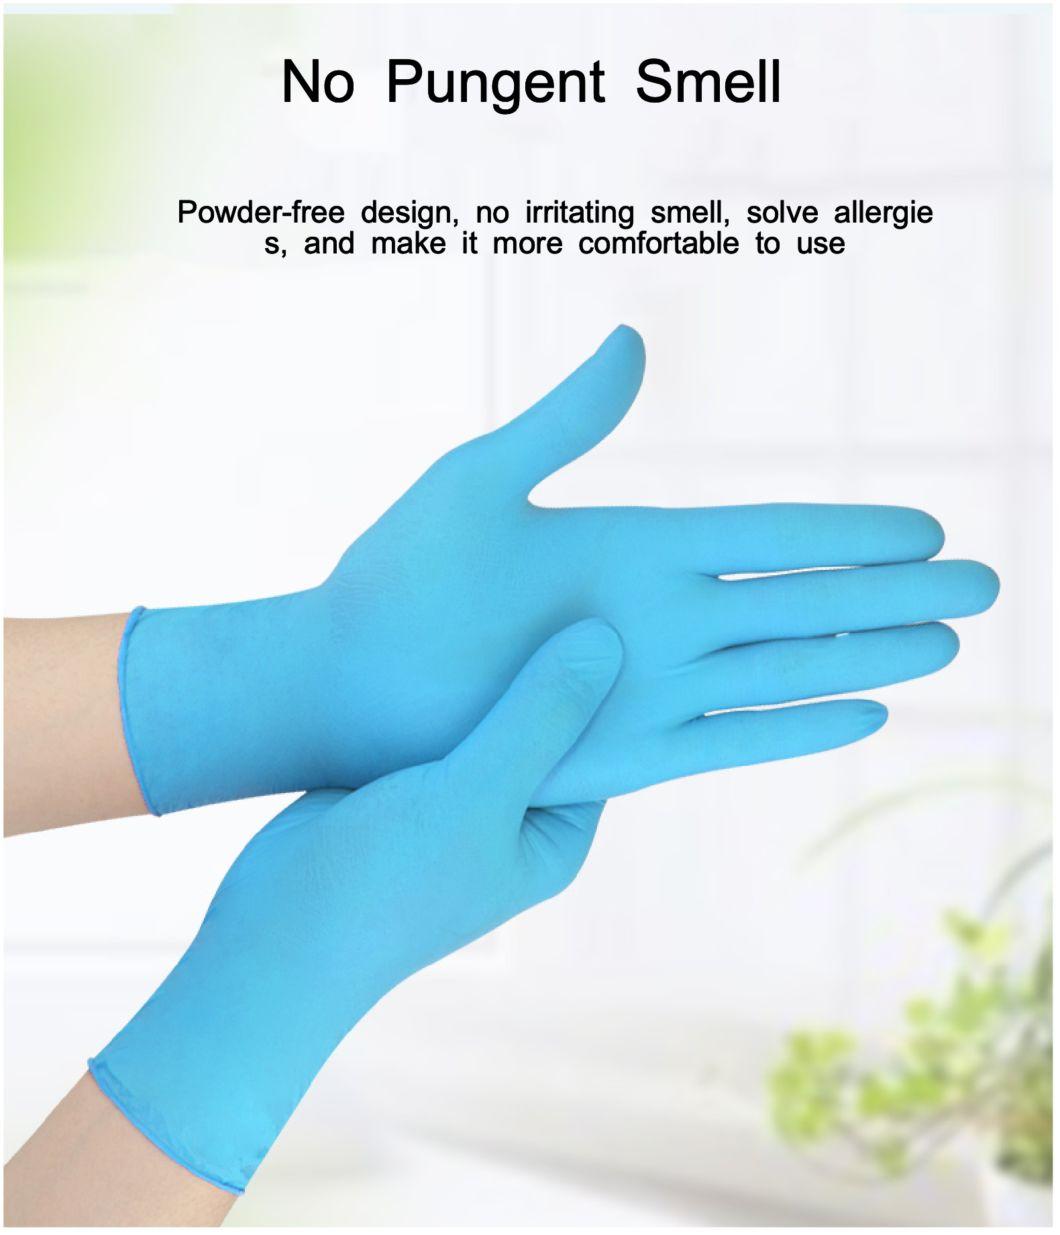 510K En455 Powder Free Disposable Nitrile Examination Gloves with 9in/12in